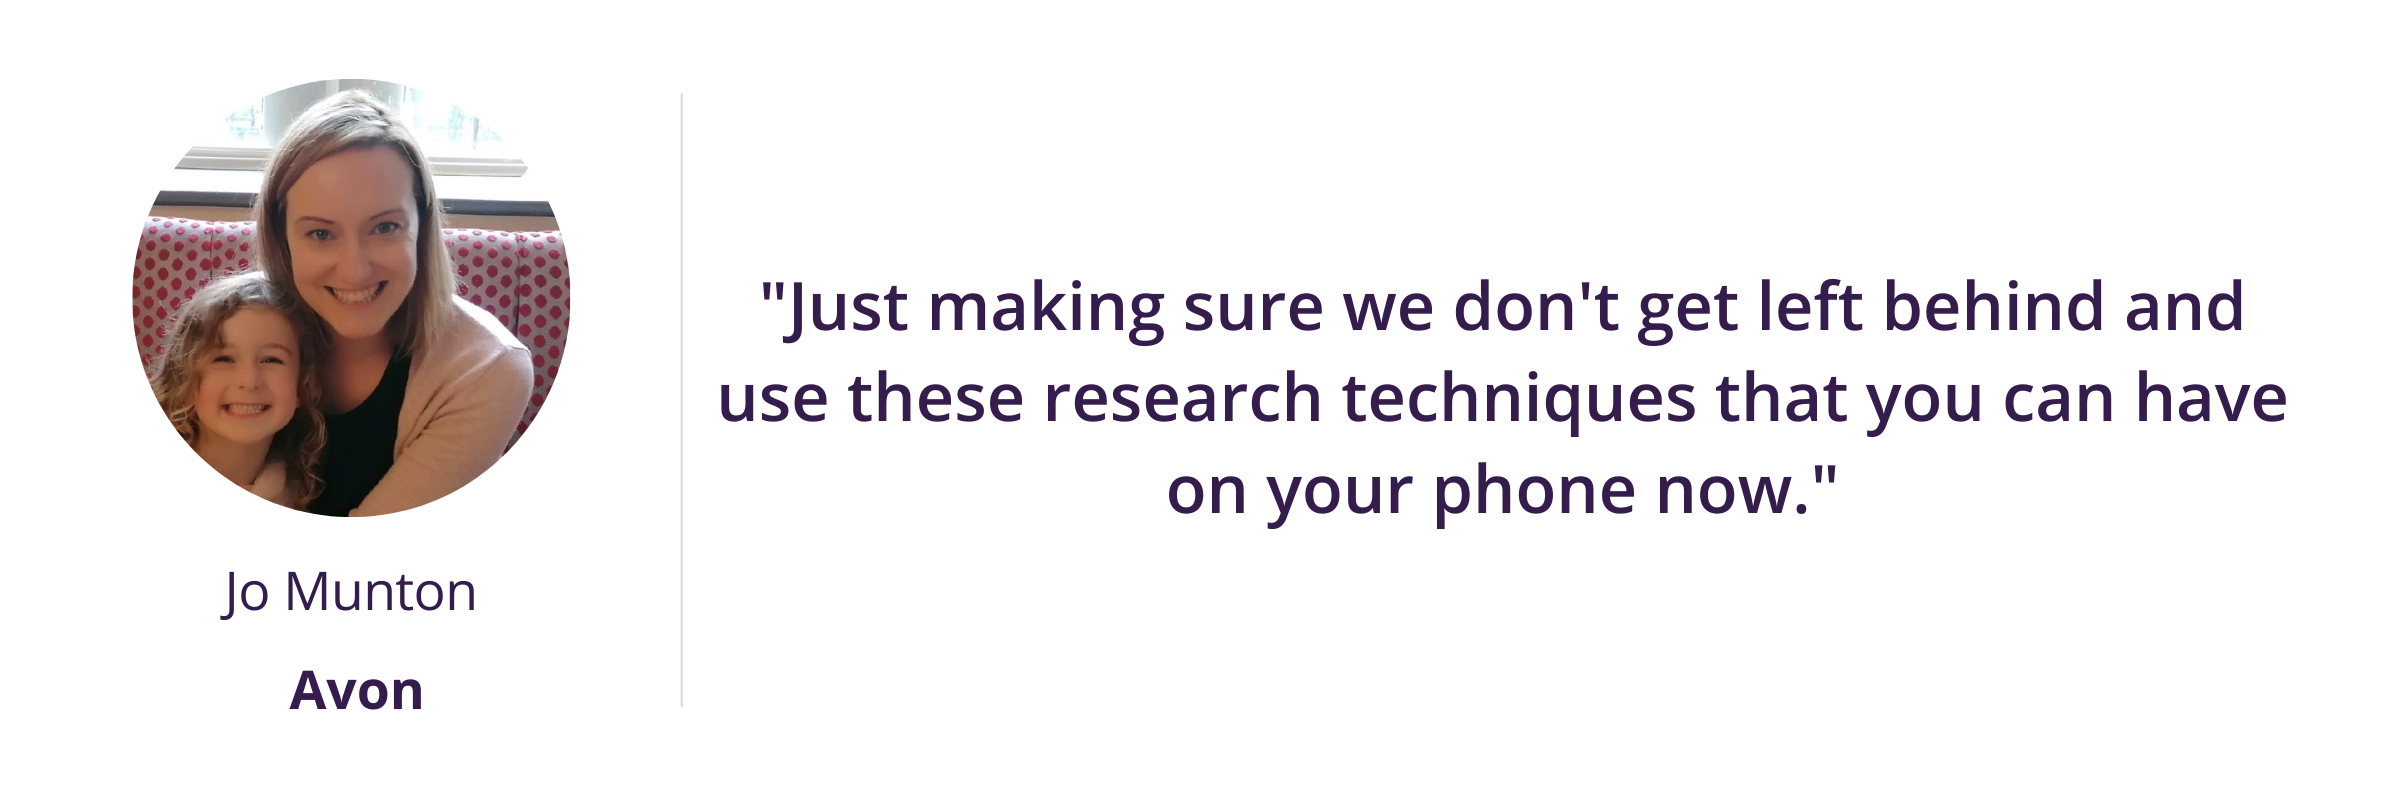 "Just making sure we don't get left behind and use these research techniques that you can have on your phone now."